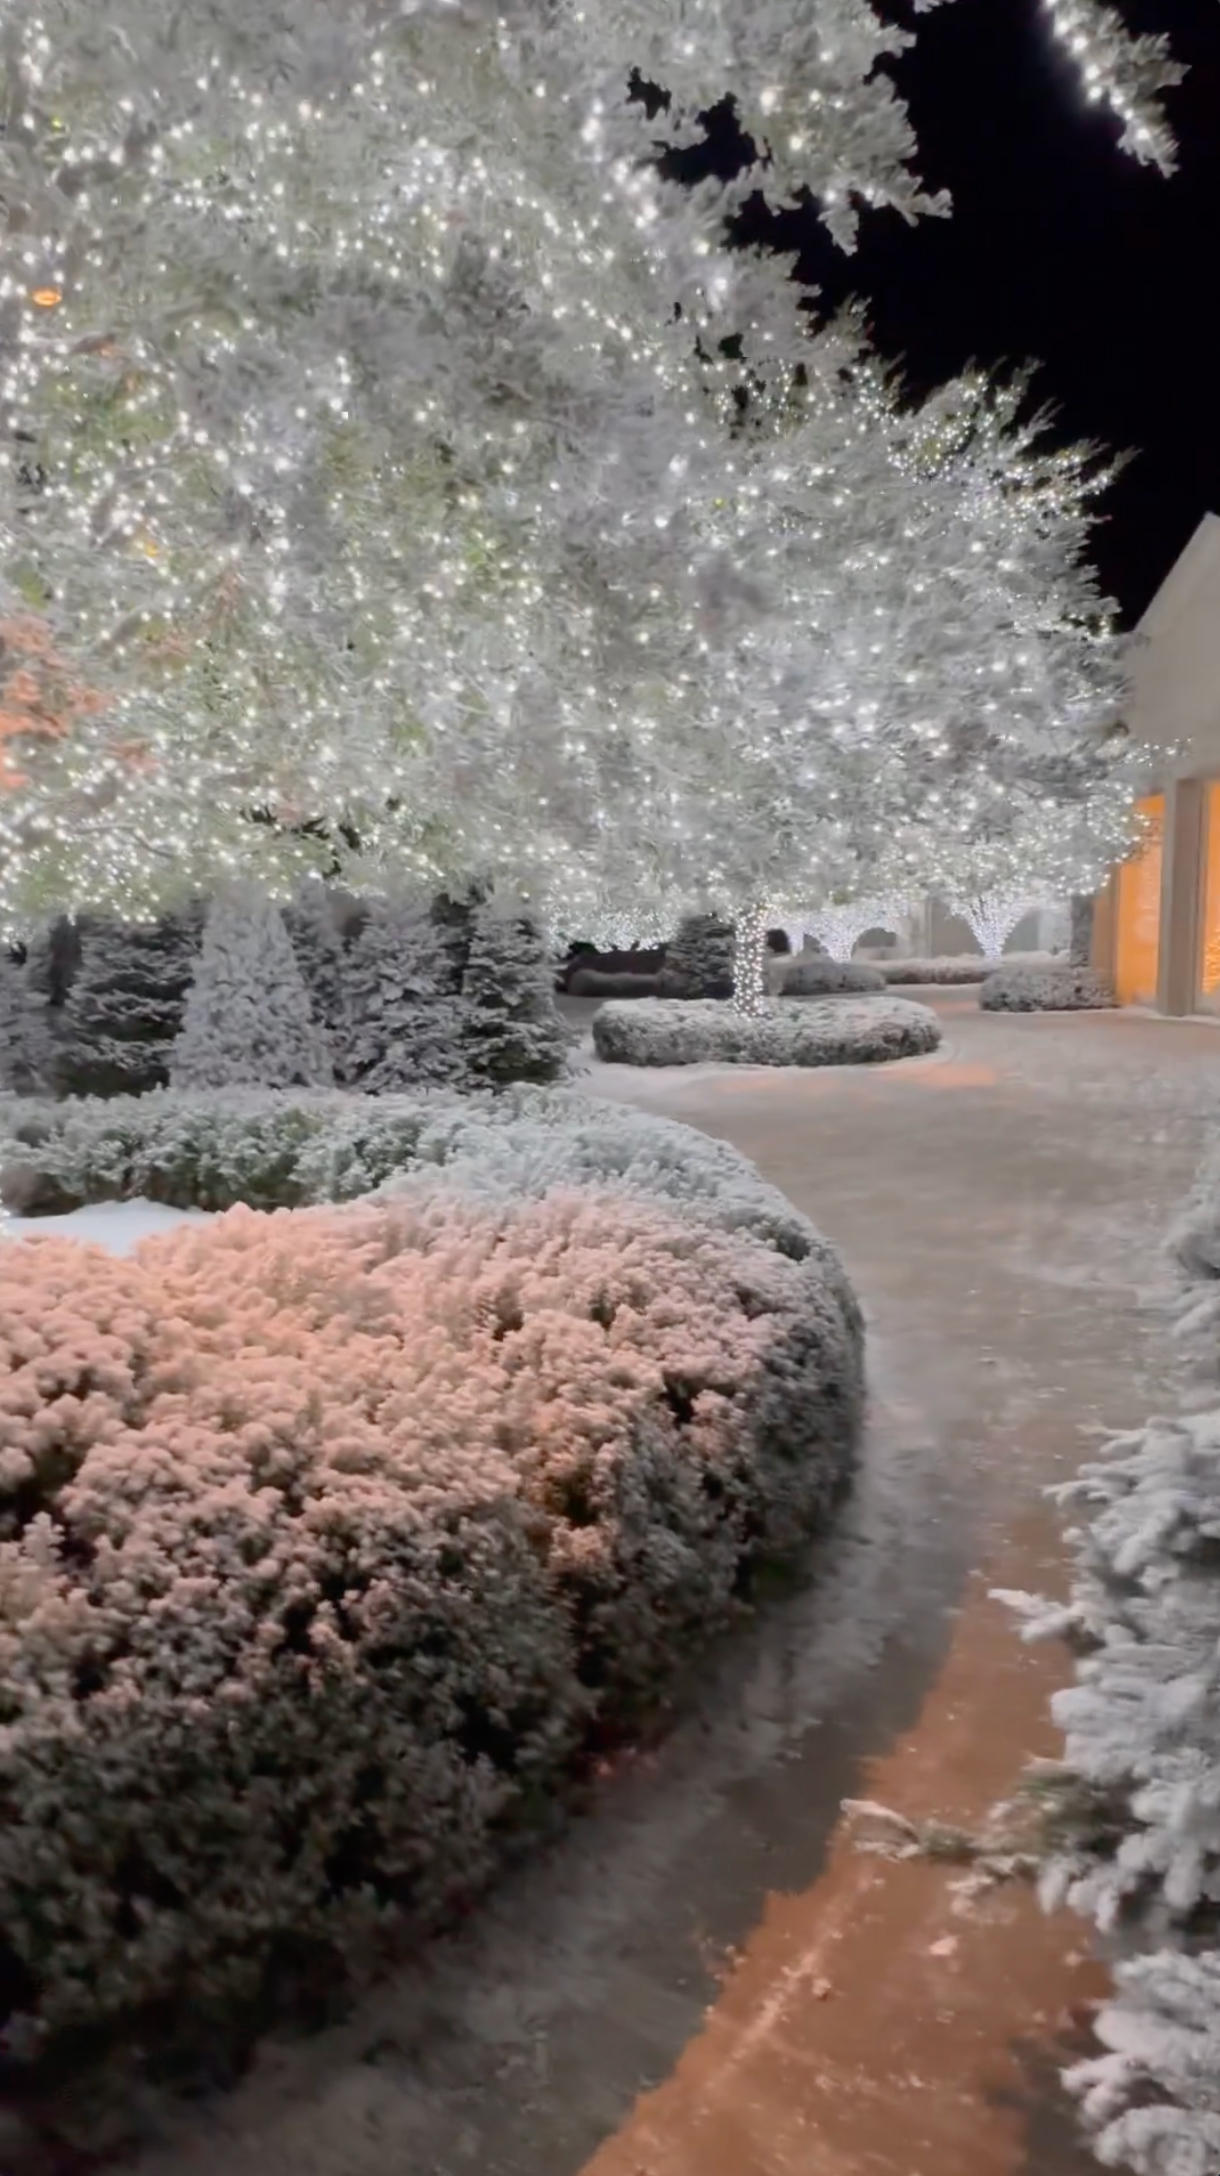 Kim showed off her backyard covered in fake snow and filled with many lit-up Christmas trees